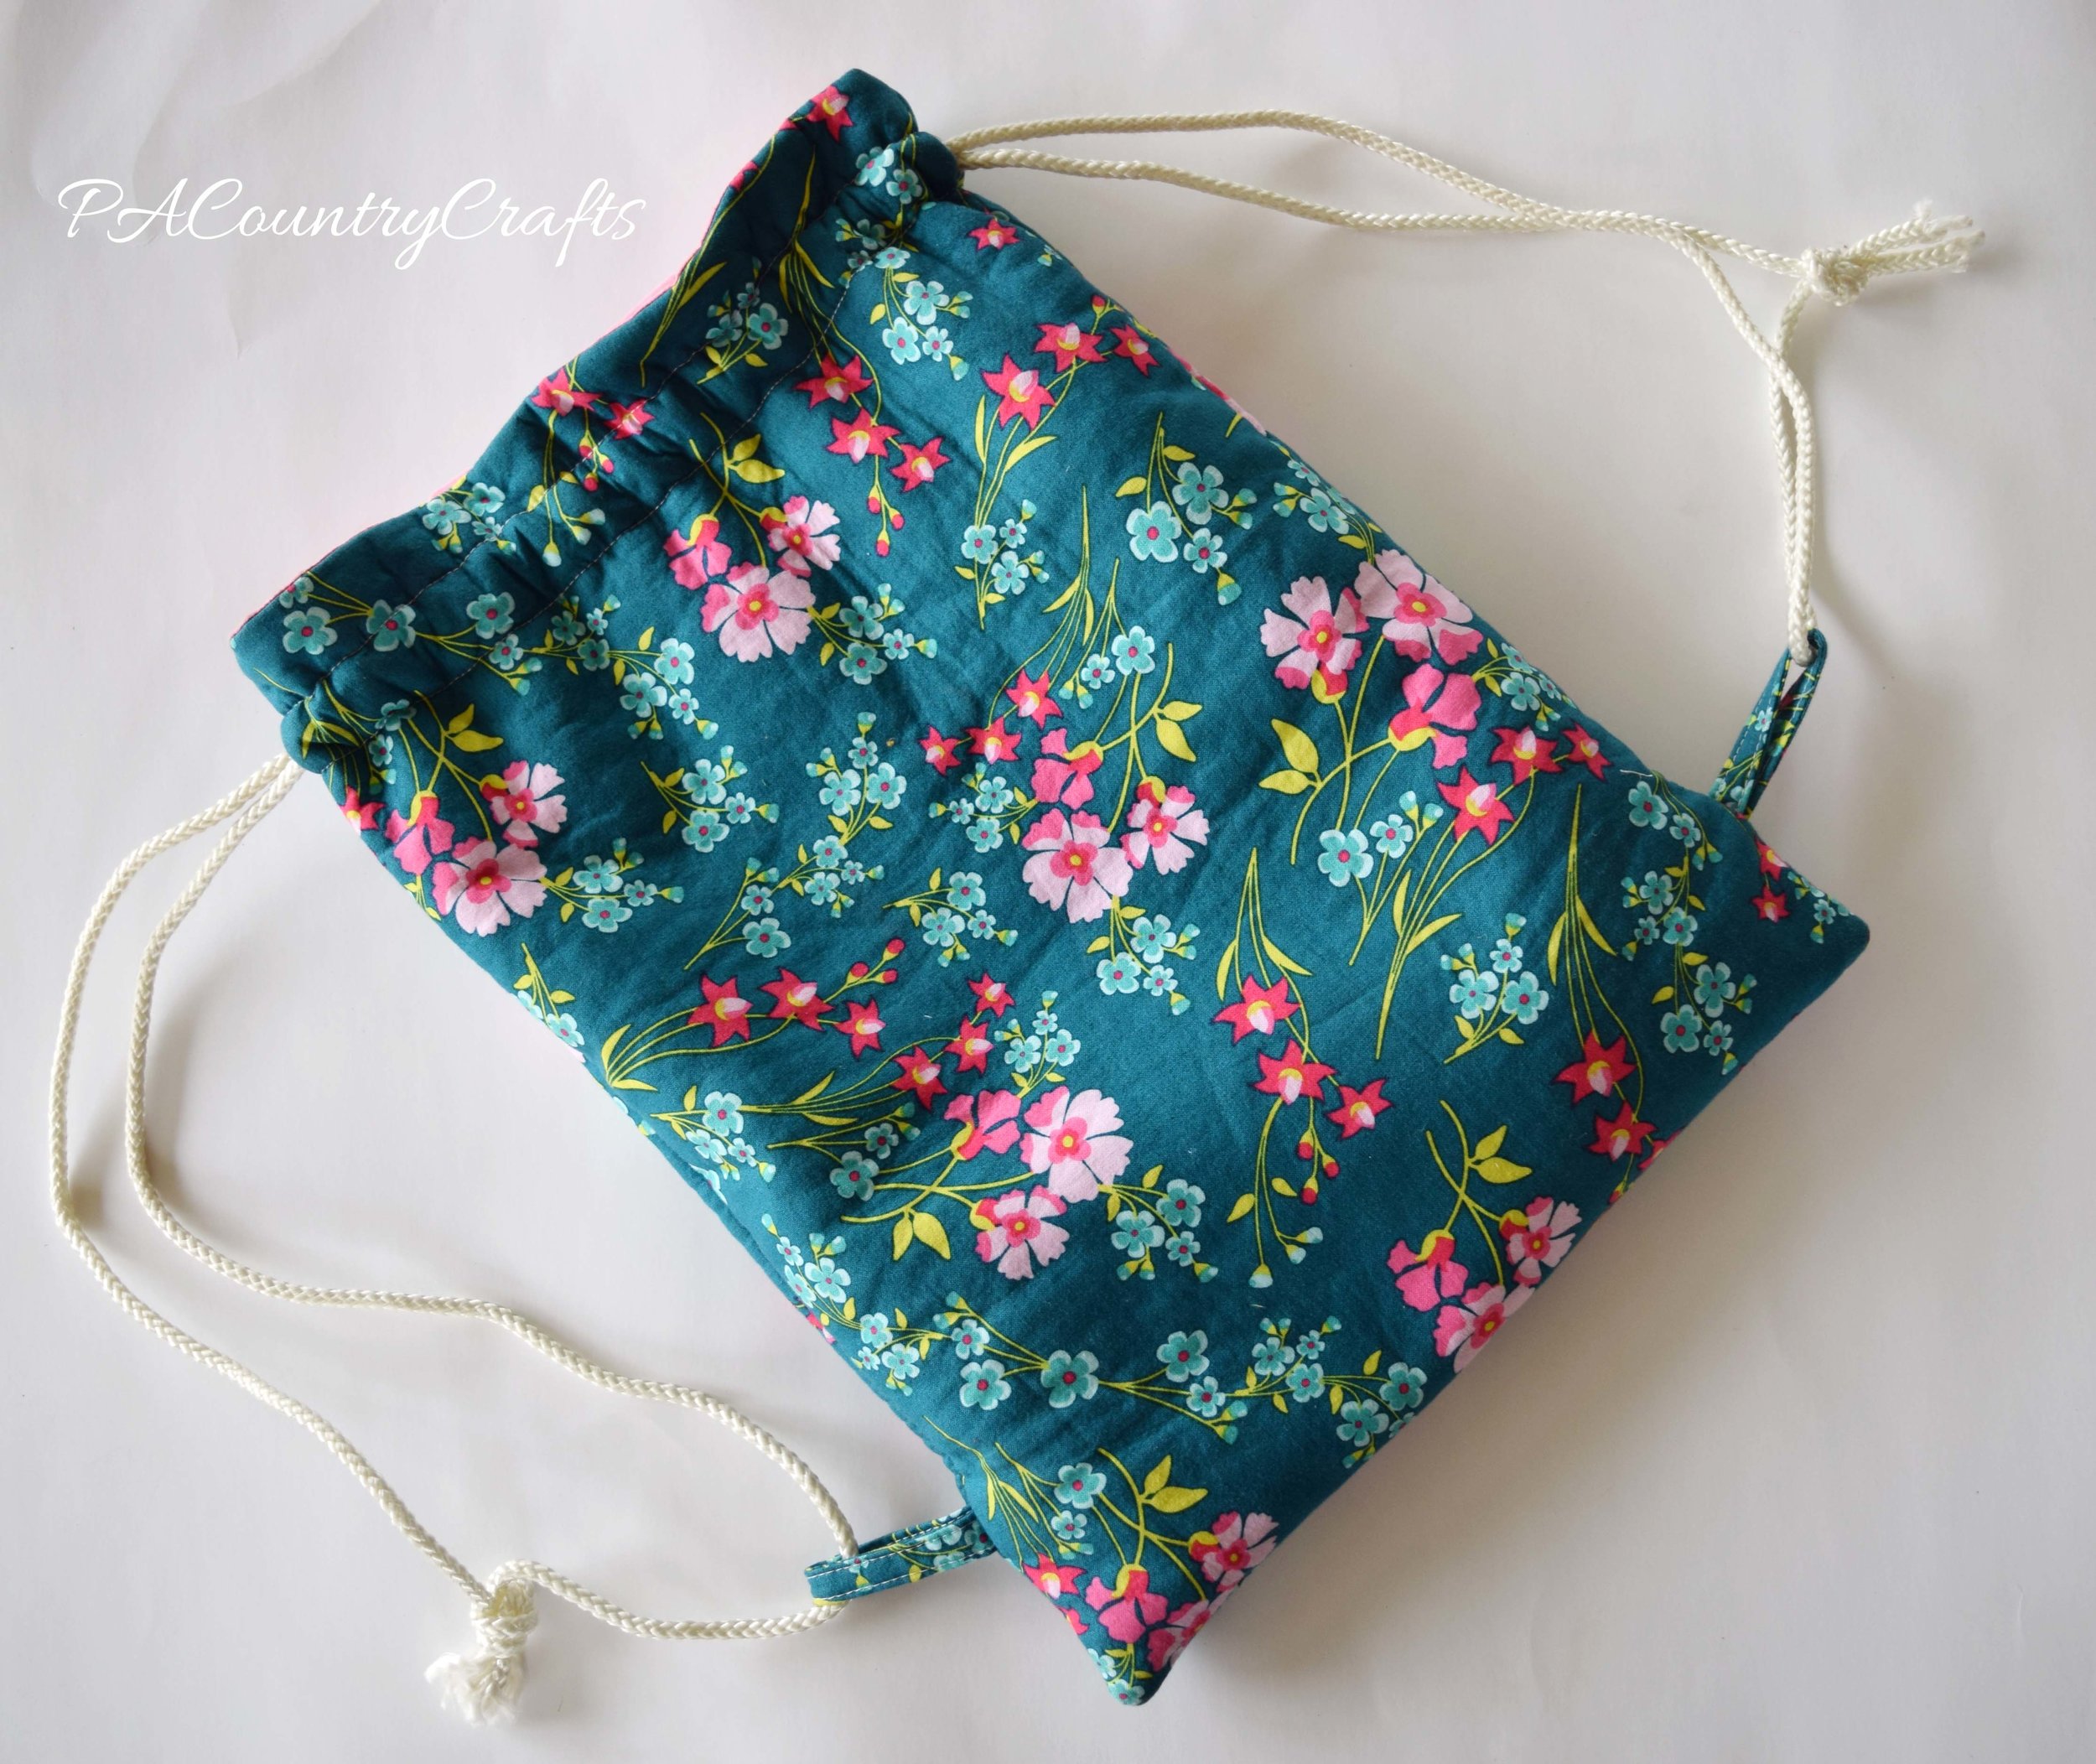 Slouch Bag – Sewing To Sell #4 – Craft Picnic